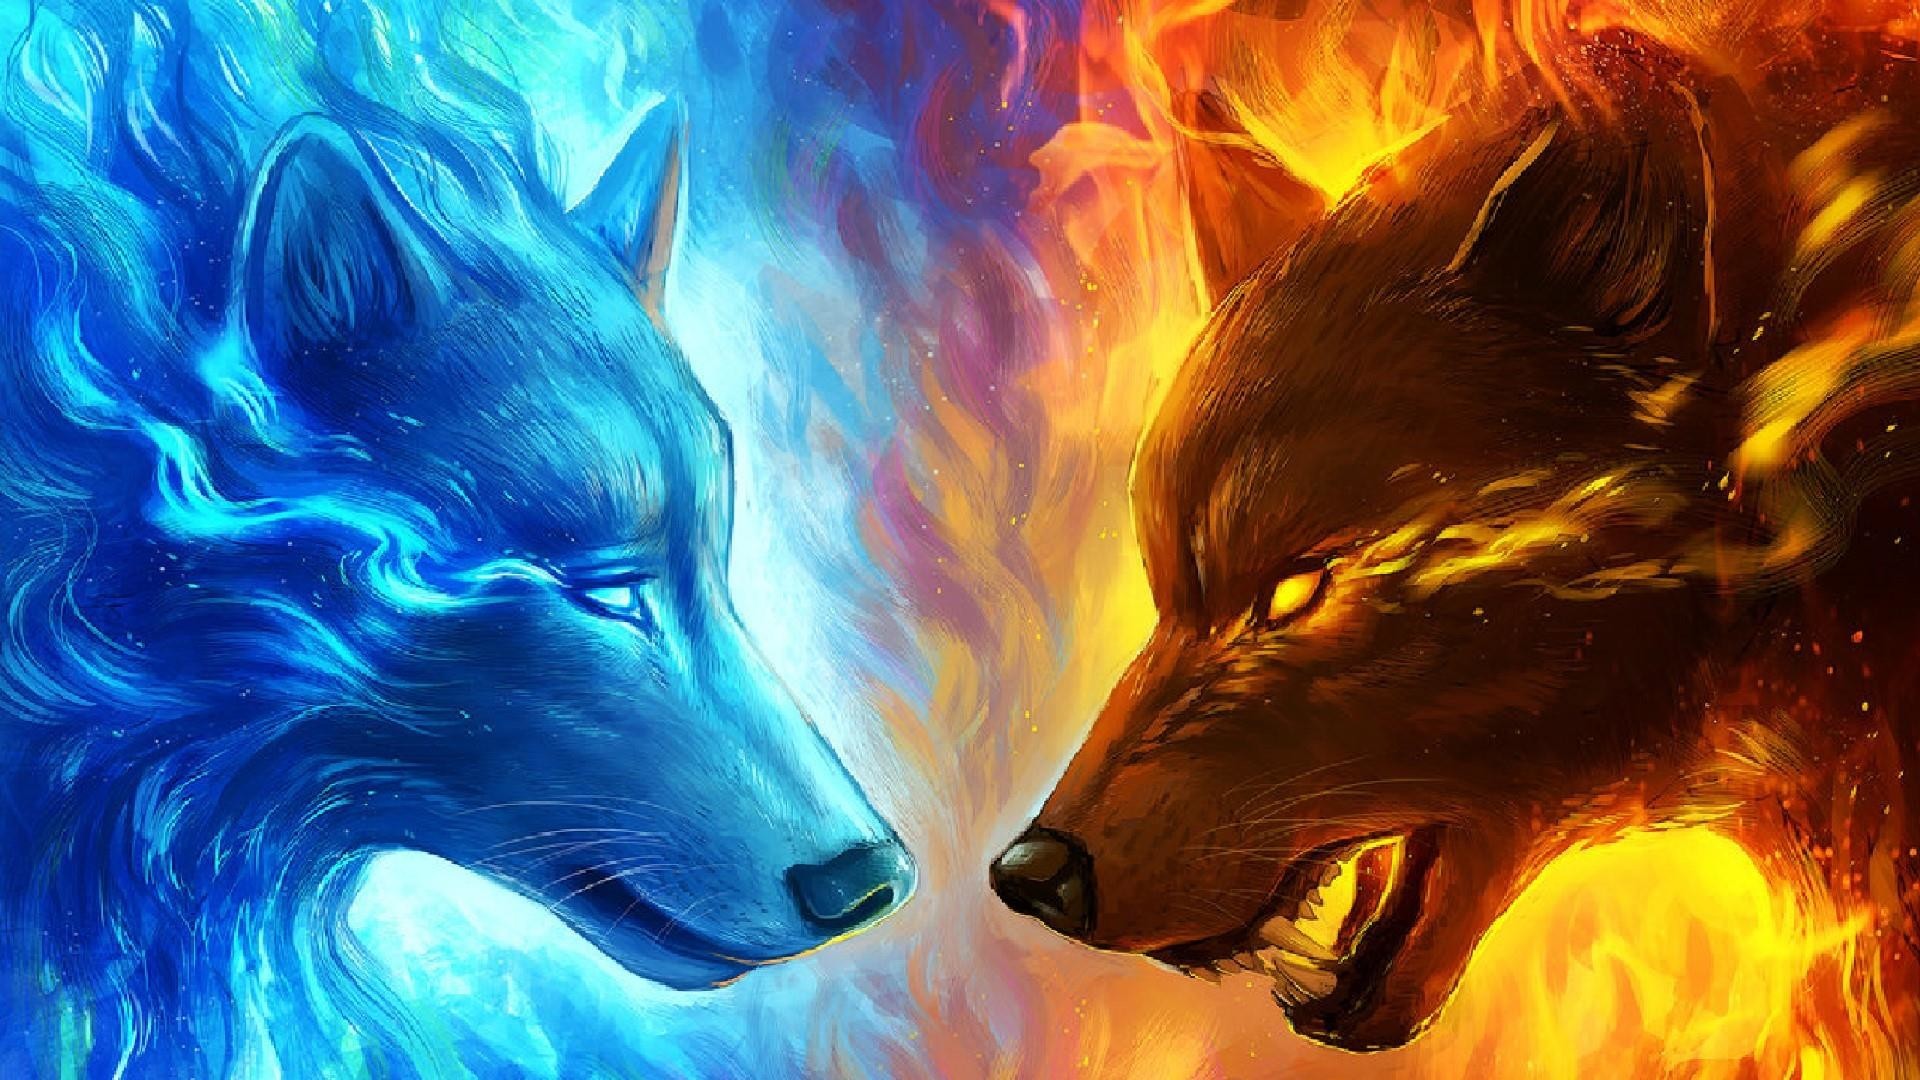 HD Wallpaper Cool Wolf with high-resolution 1920x1080 pixel. You can use this wallpaper for your Desktop Computer Backgrounds, Mac Wallpapers, Android Lock screen or iPhone Screensavers and another smartphone device